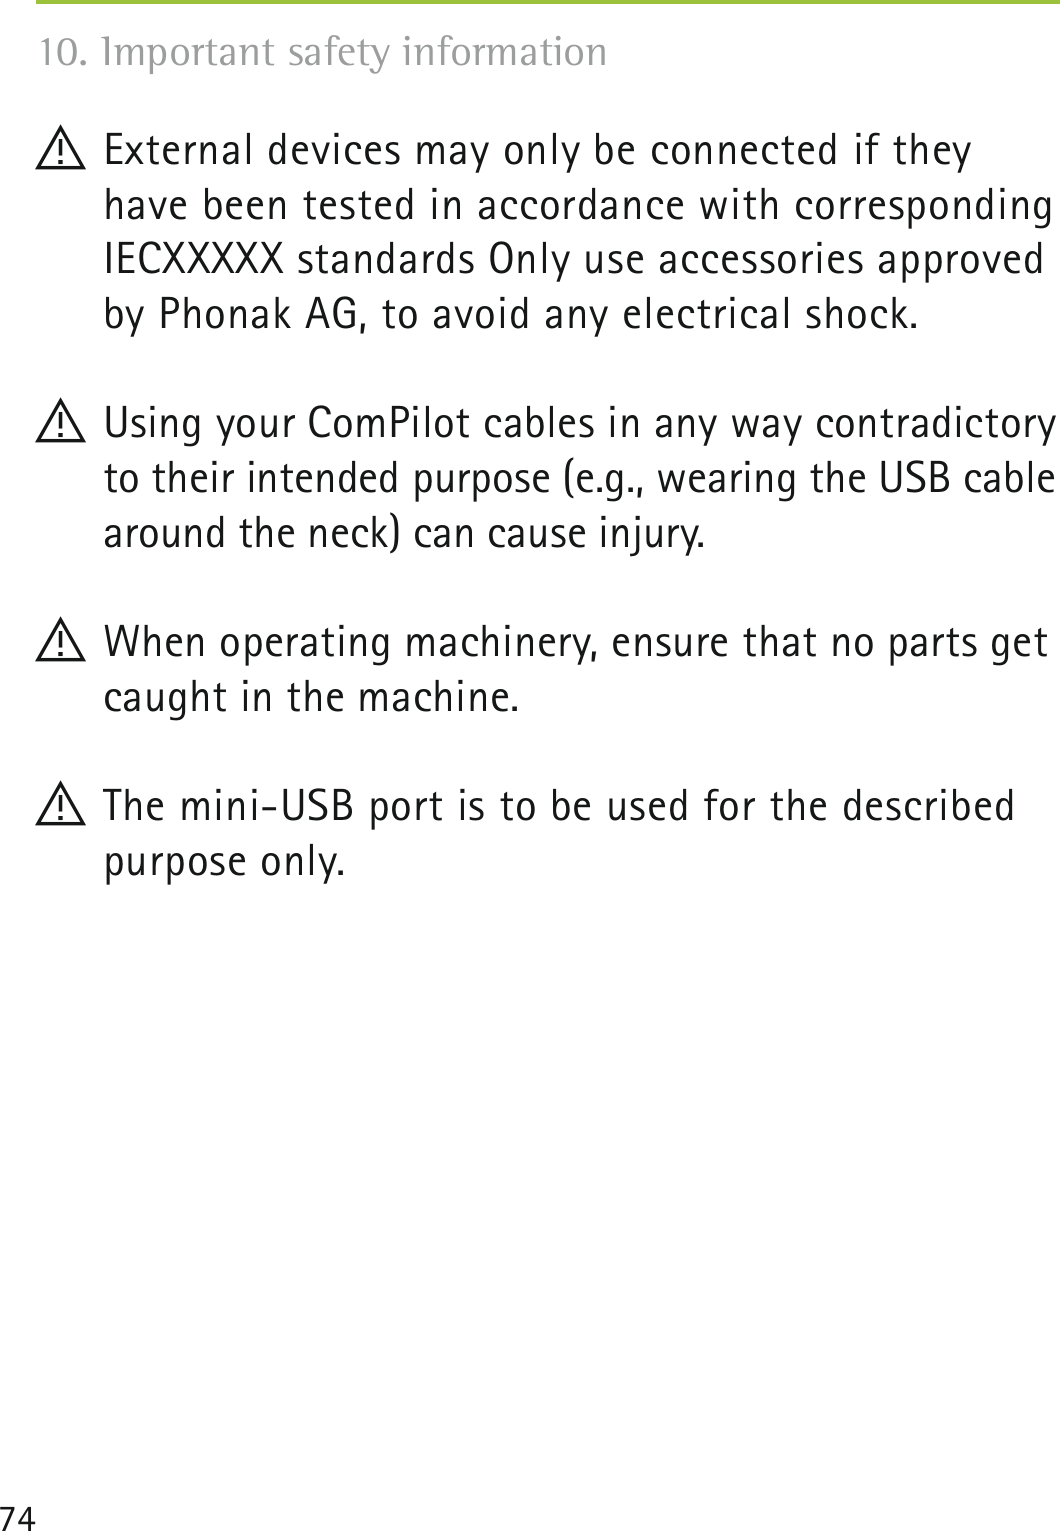 74! External devices may only be connected if they have been tested in accordance with corresponding IECXXXXX standards Only use accessories approved by Phonak AG, to avoid any electrical shock.! Using your ComPilot cables in any way contradictory to their intended purpose (e.g., wearing the USB cable around the neck) can cause injury.! When operating machinery, ensure that no parts get caught in the machine.! The mini-USB port is to be used for the described purpose only.10. Important safety information 